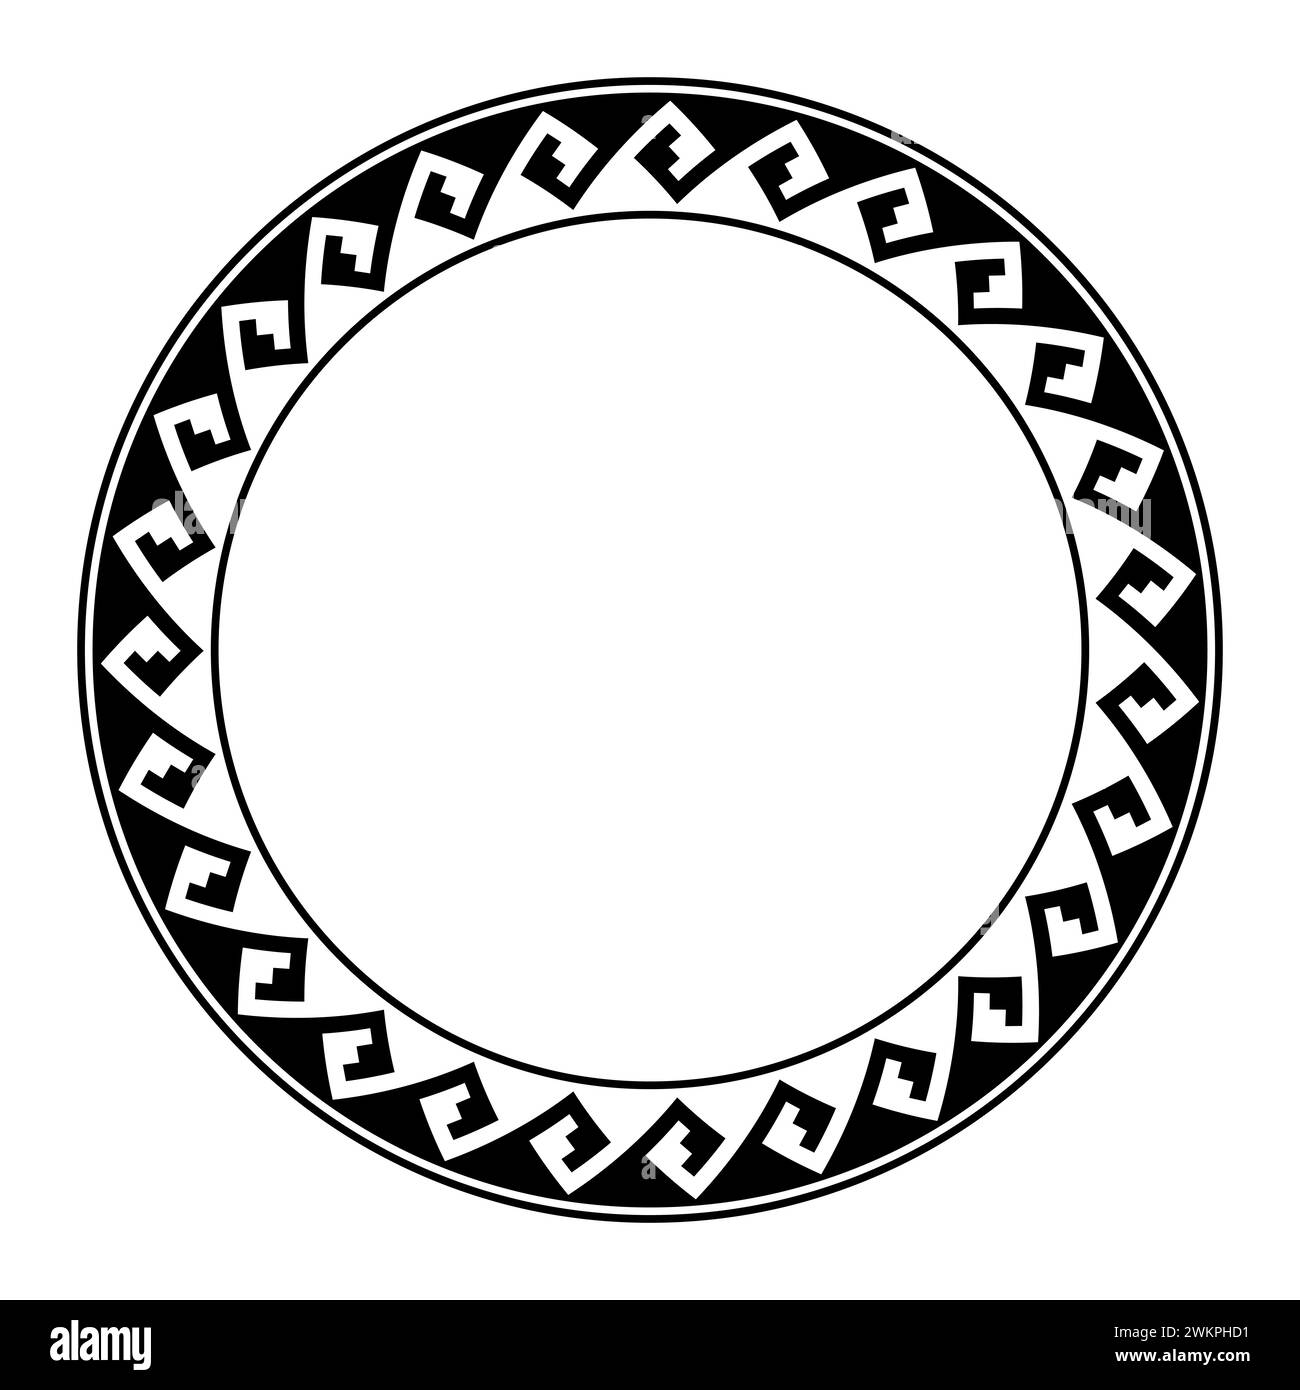 Pueblo Indian pottery motif, circle frame with meander pattern. Decorative border with serpent stepped fret pattern, seamless connected. Stock Photo